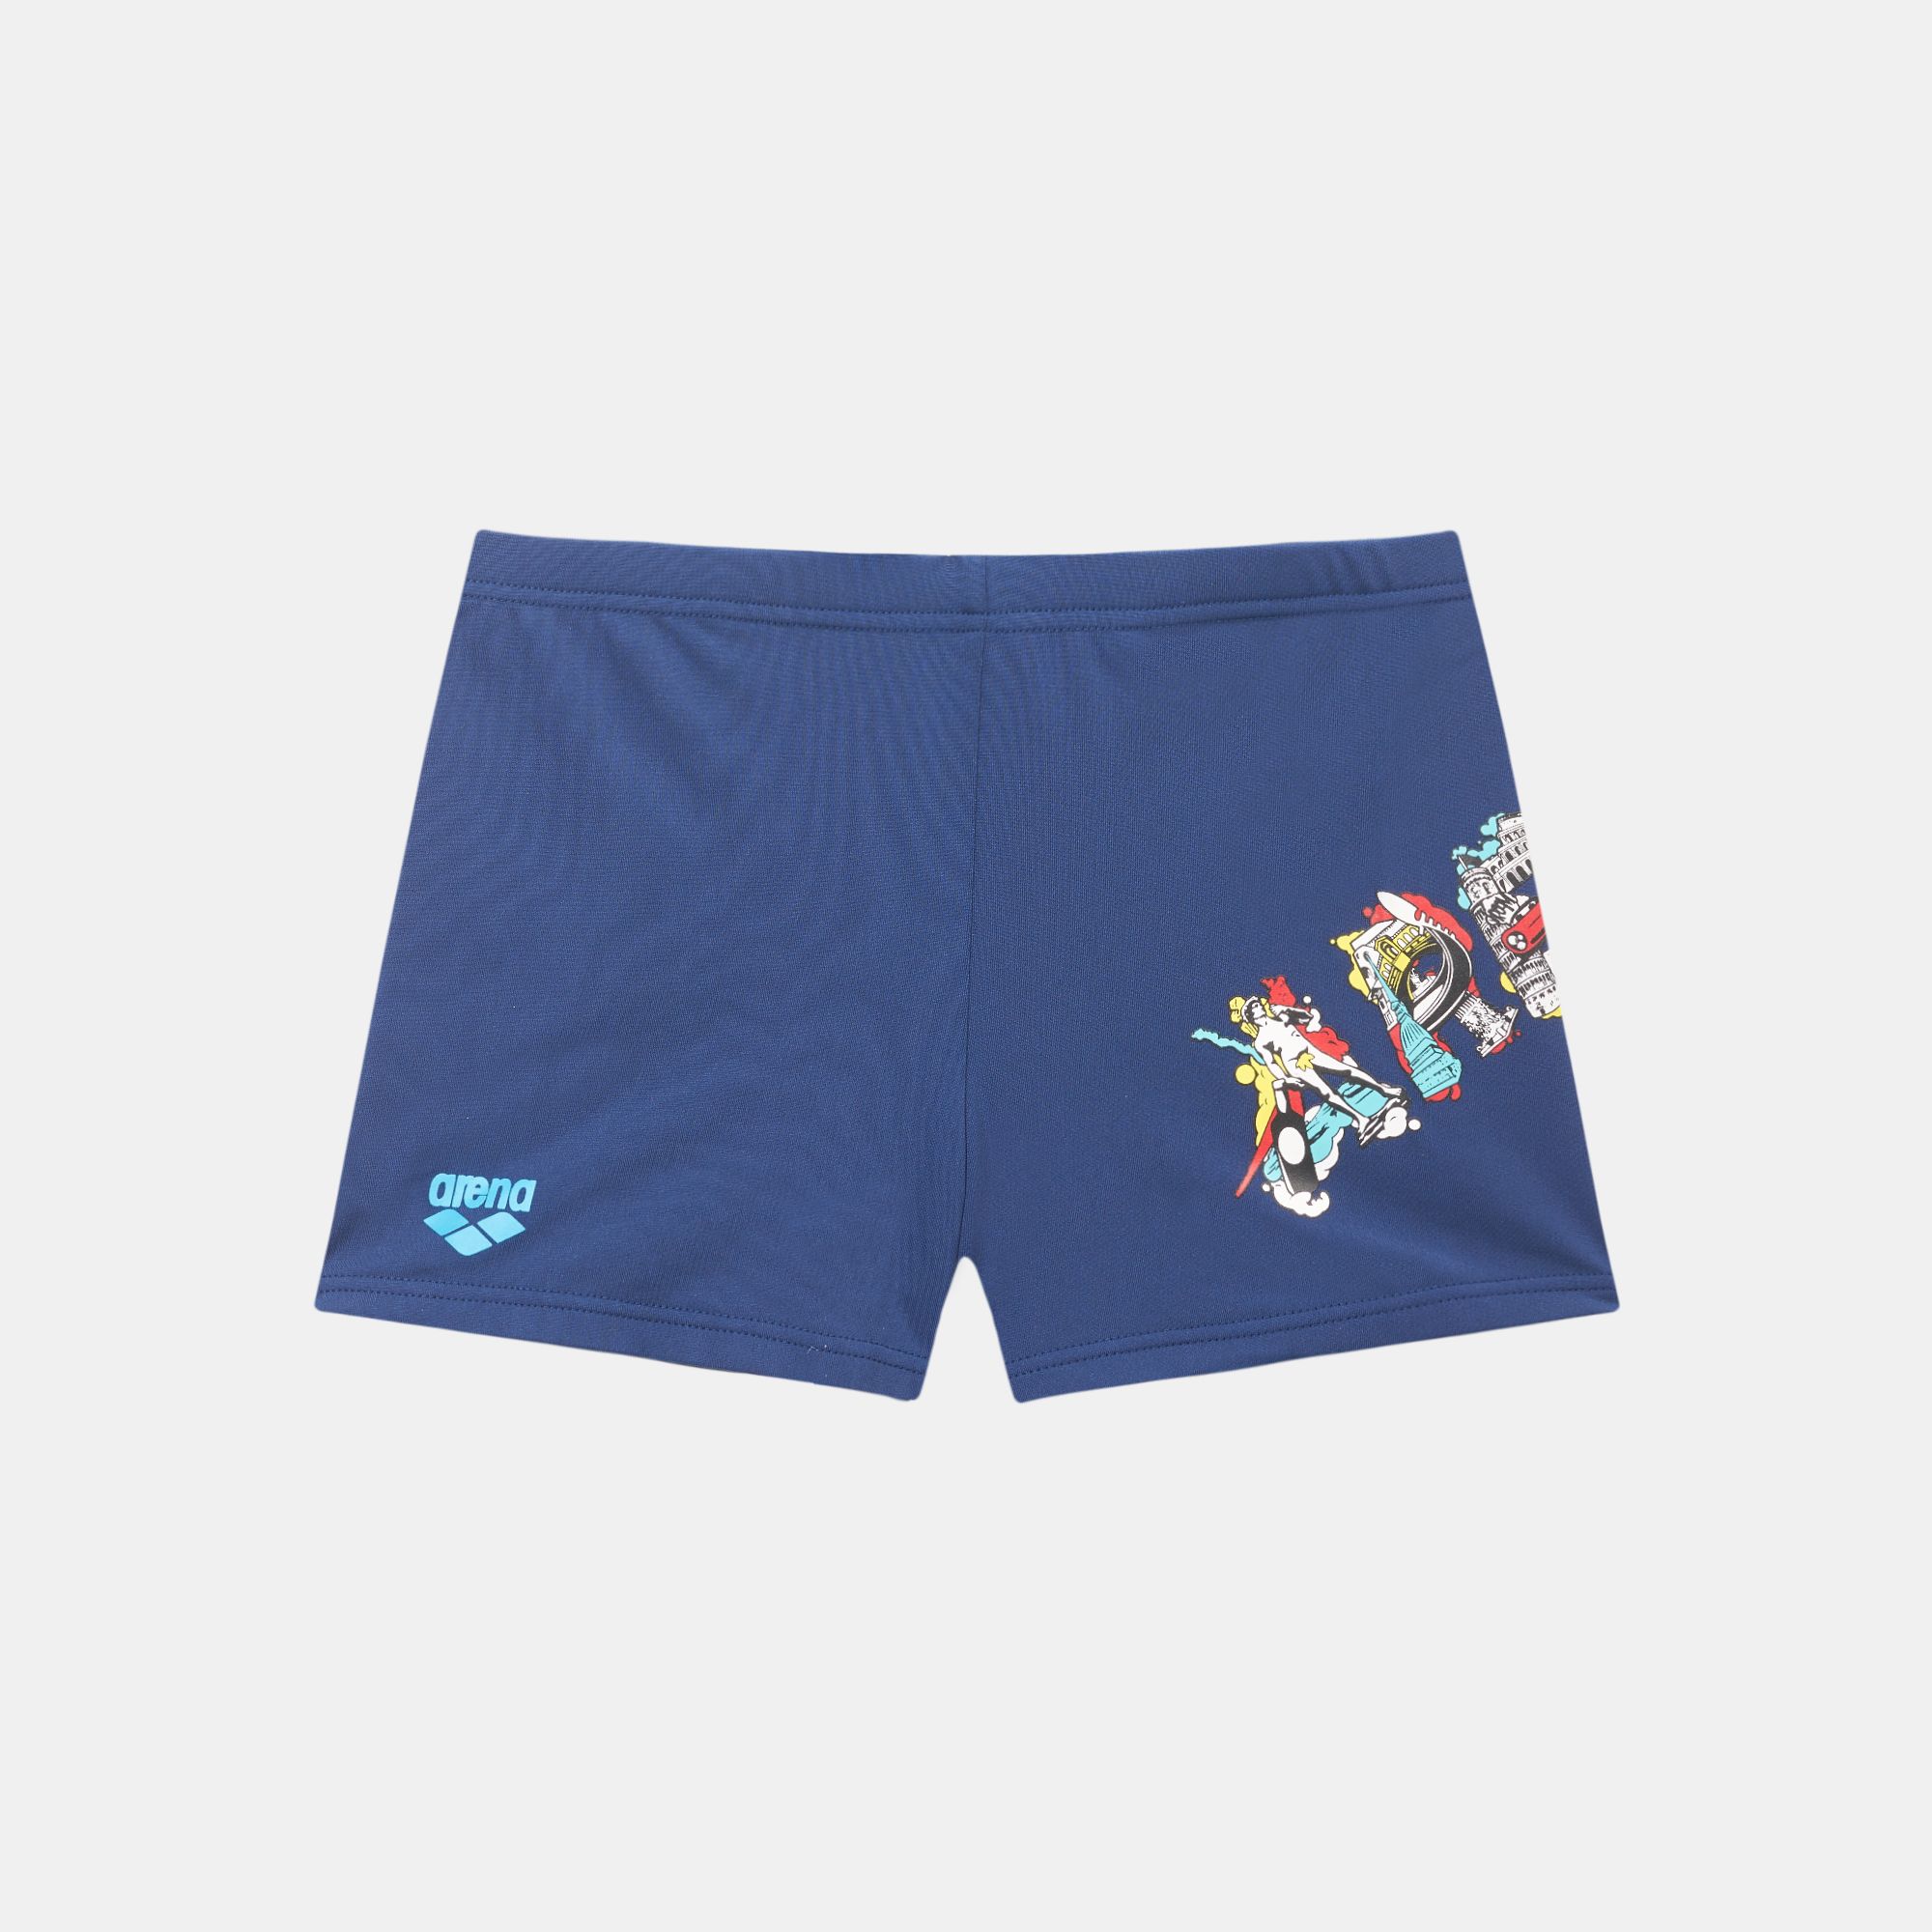 Shop Blue Arena Kids' Monuments Trunks for Kids by Arena | SSS